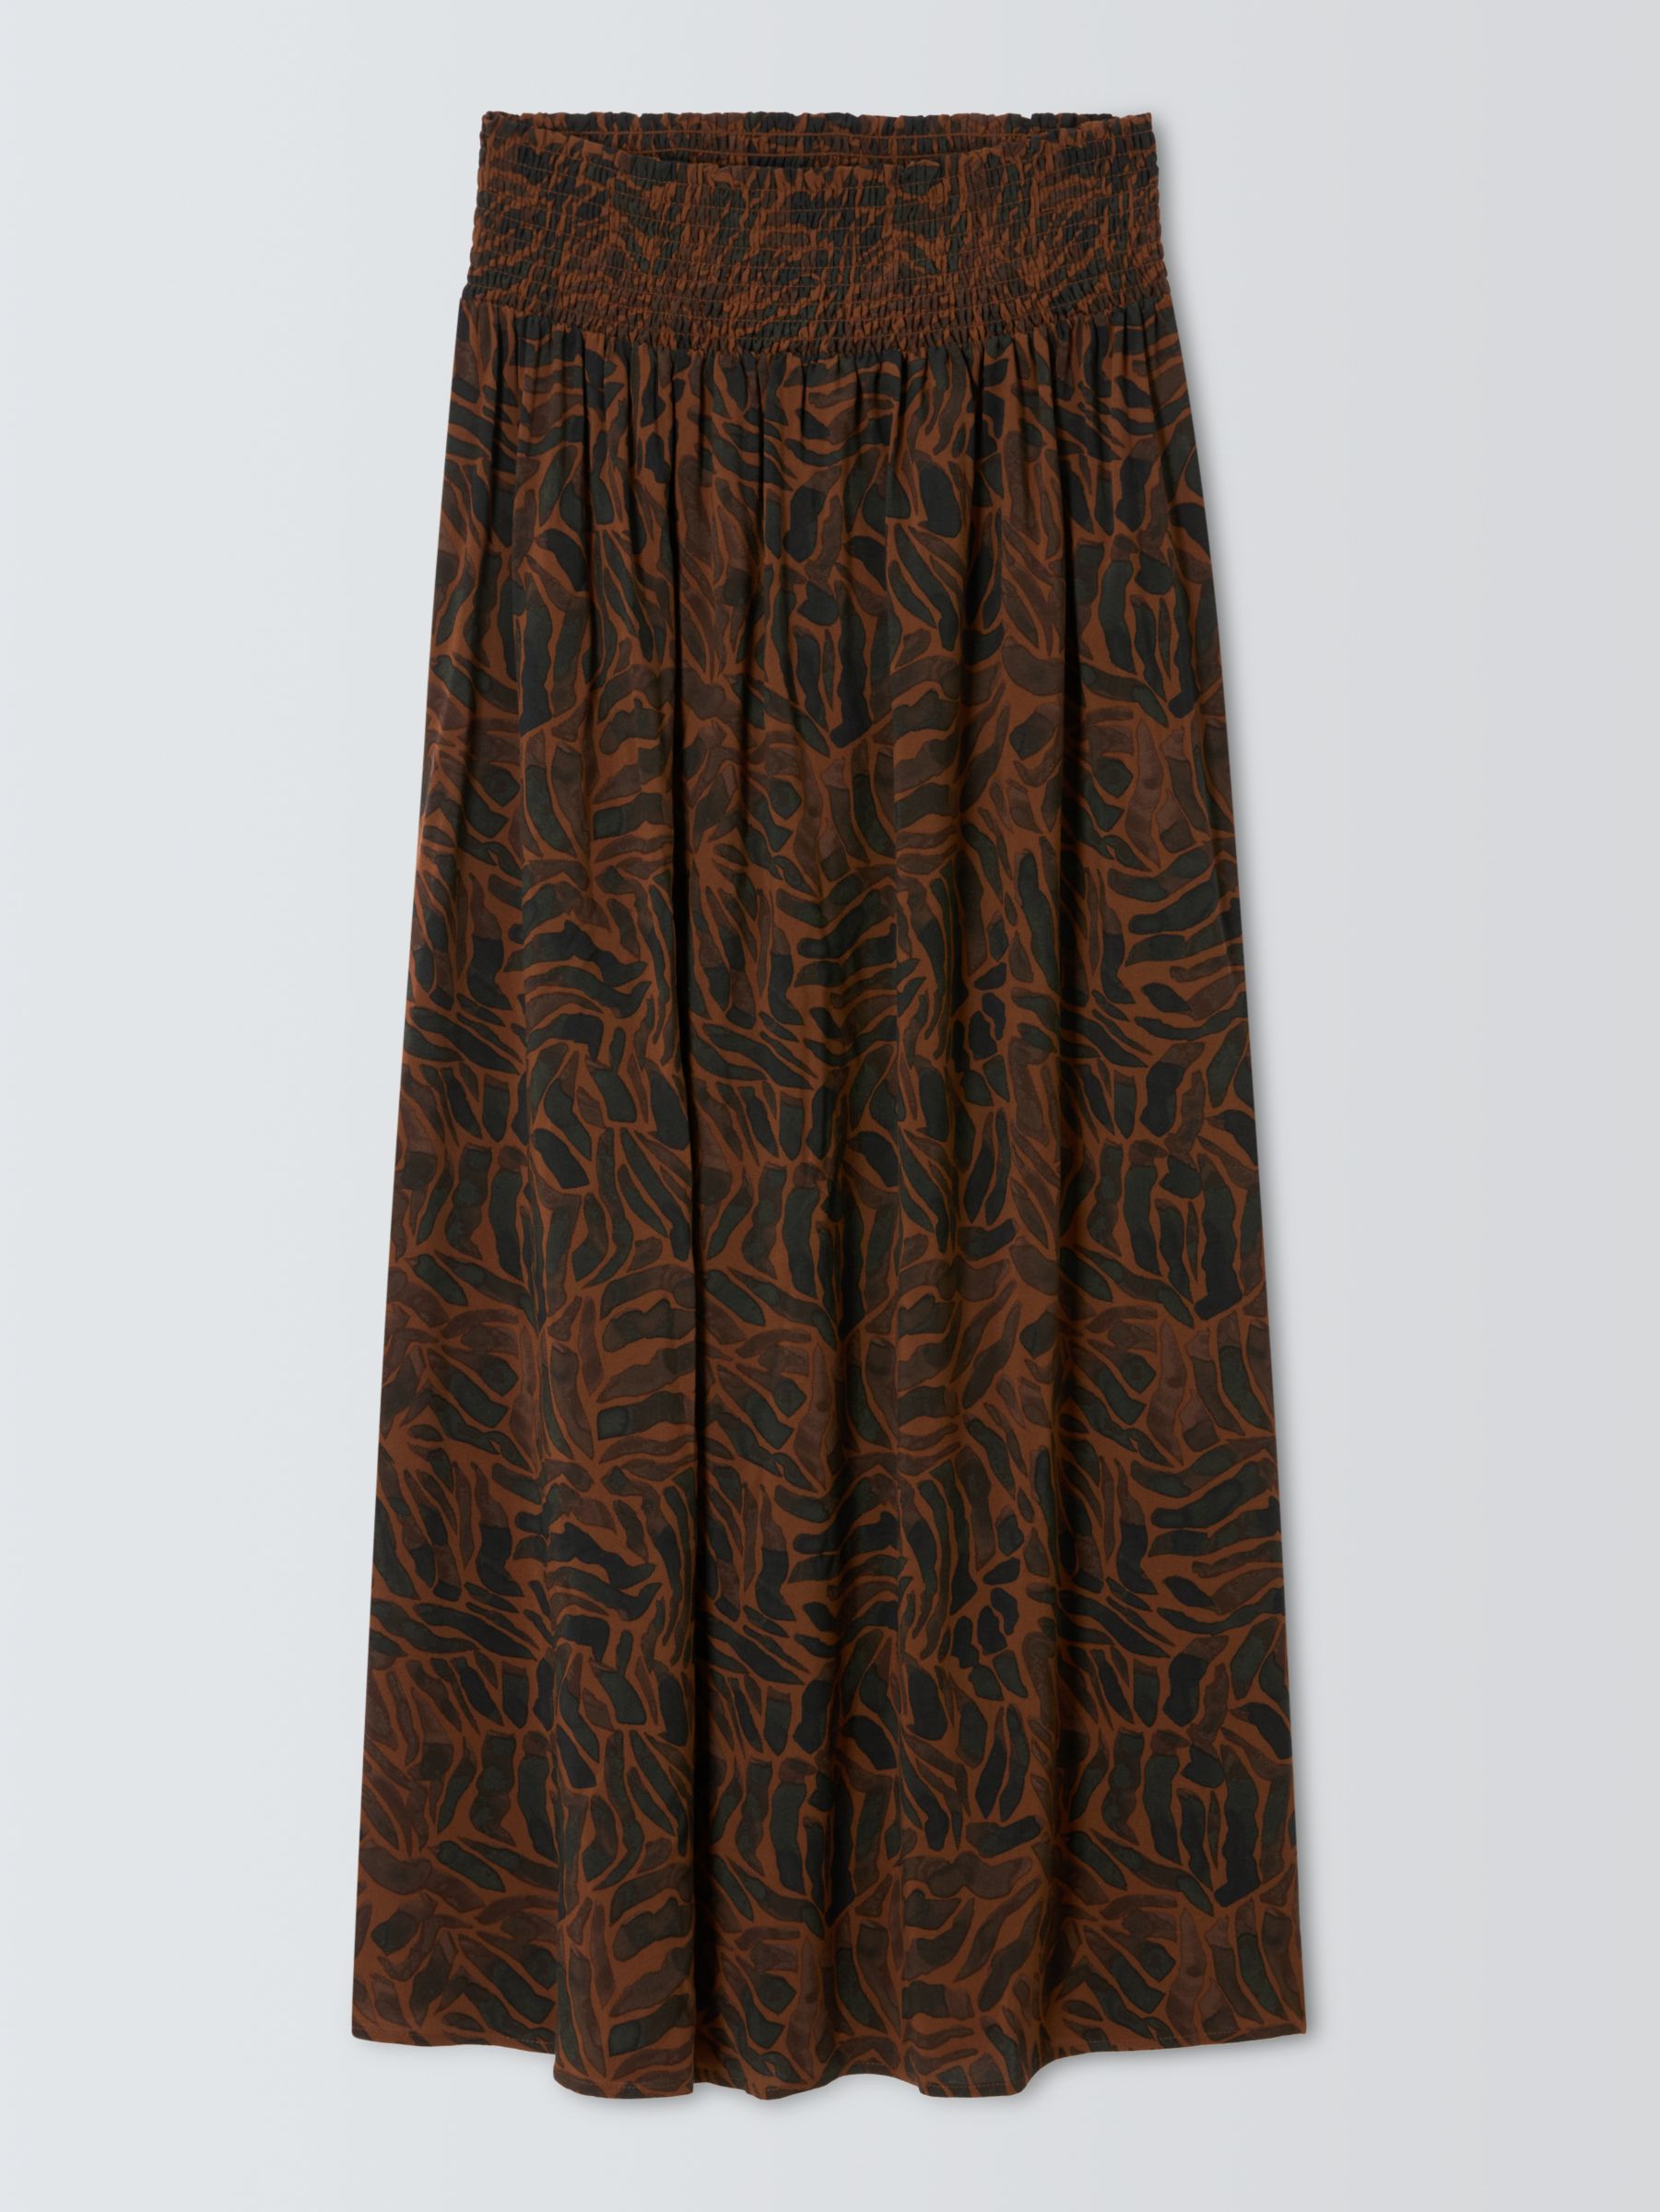 Buy John Lewis ANYDAY Solare Shirred Waist Maxi Skirt, Brown/Multi Online at johnlewis.com